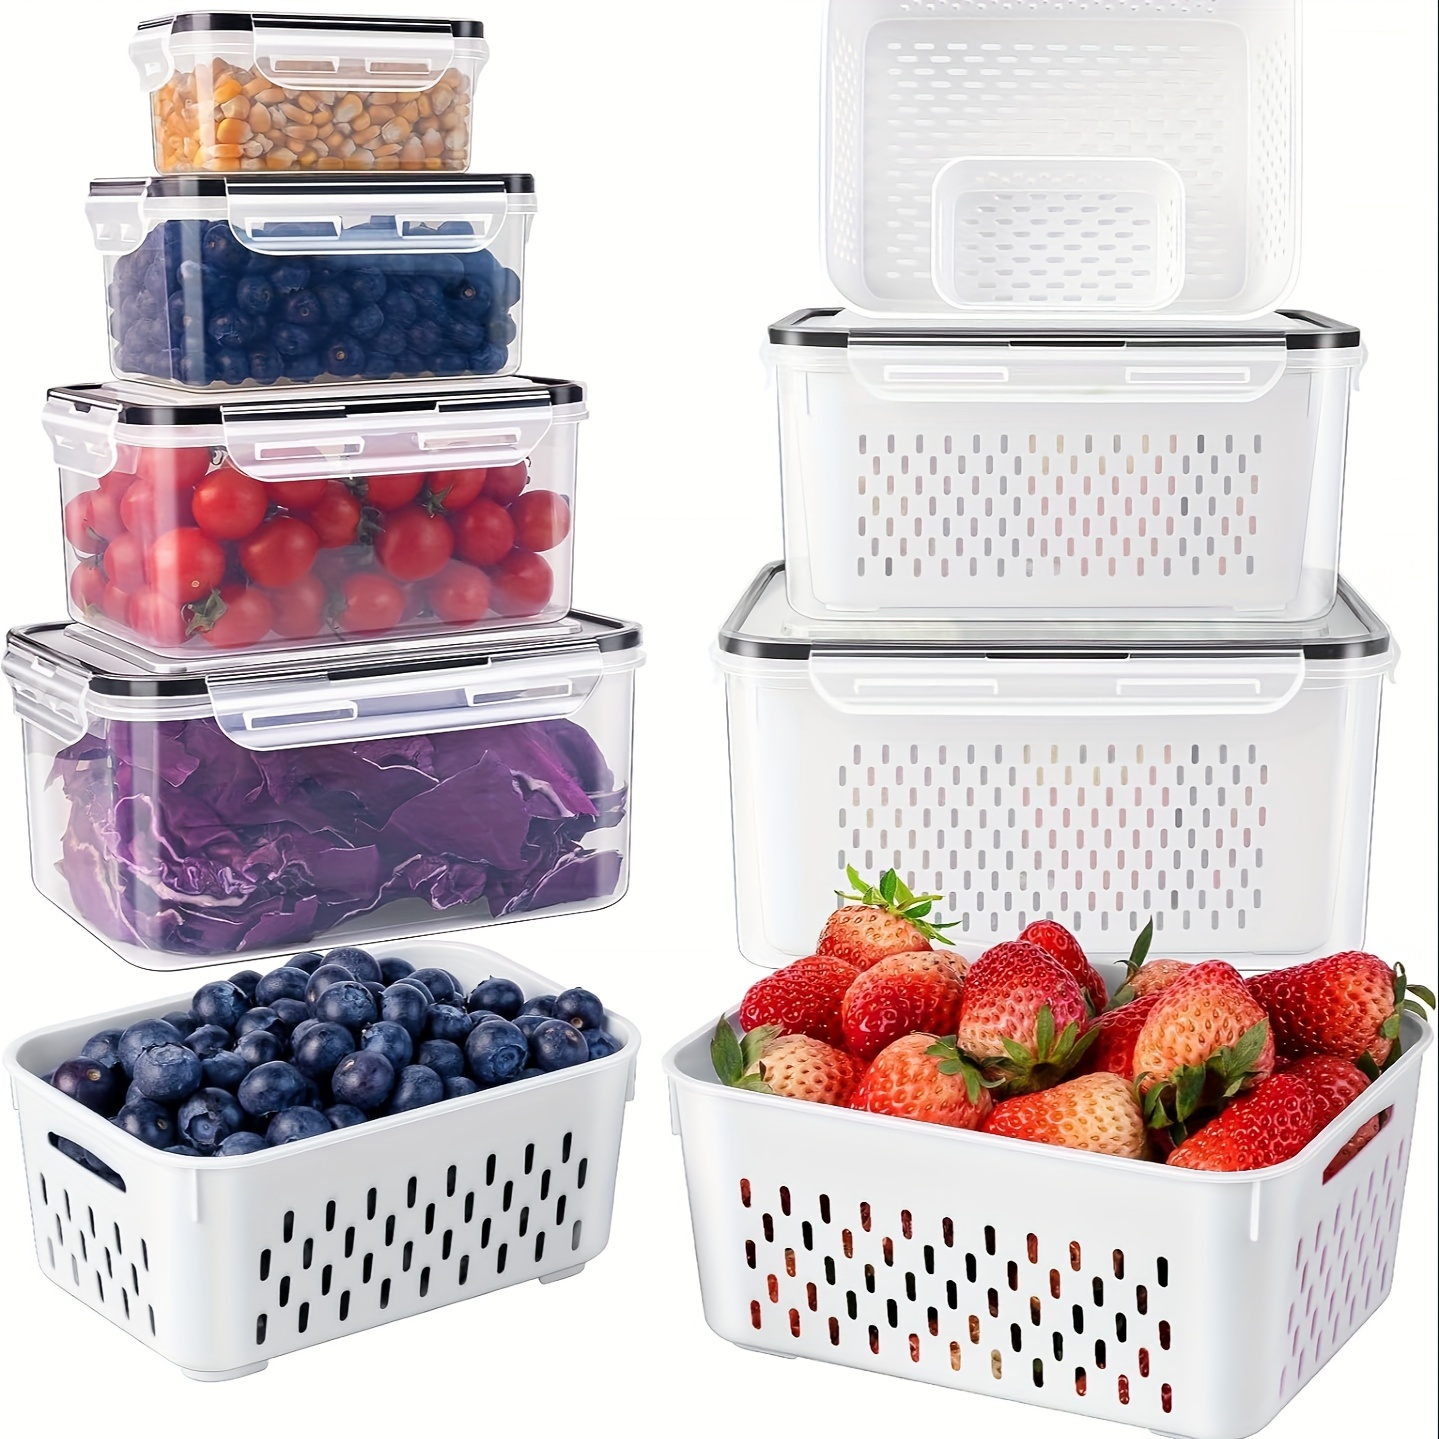 

4pcs Premium Leak-proof Food Storage Containers - Bpa-free, 2-layer Airtight Design For Easy Meal Prep - Reusable & Stackable Kitchen Organizers - Perfect For Fruits, Vegetables, Meat & Grains